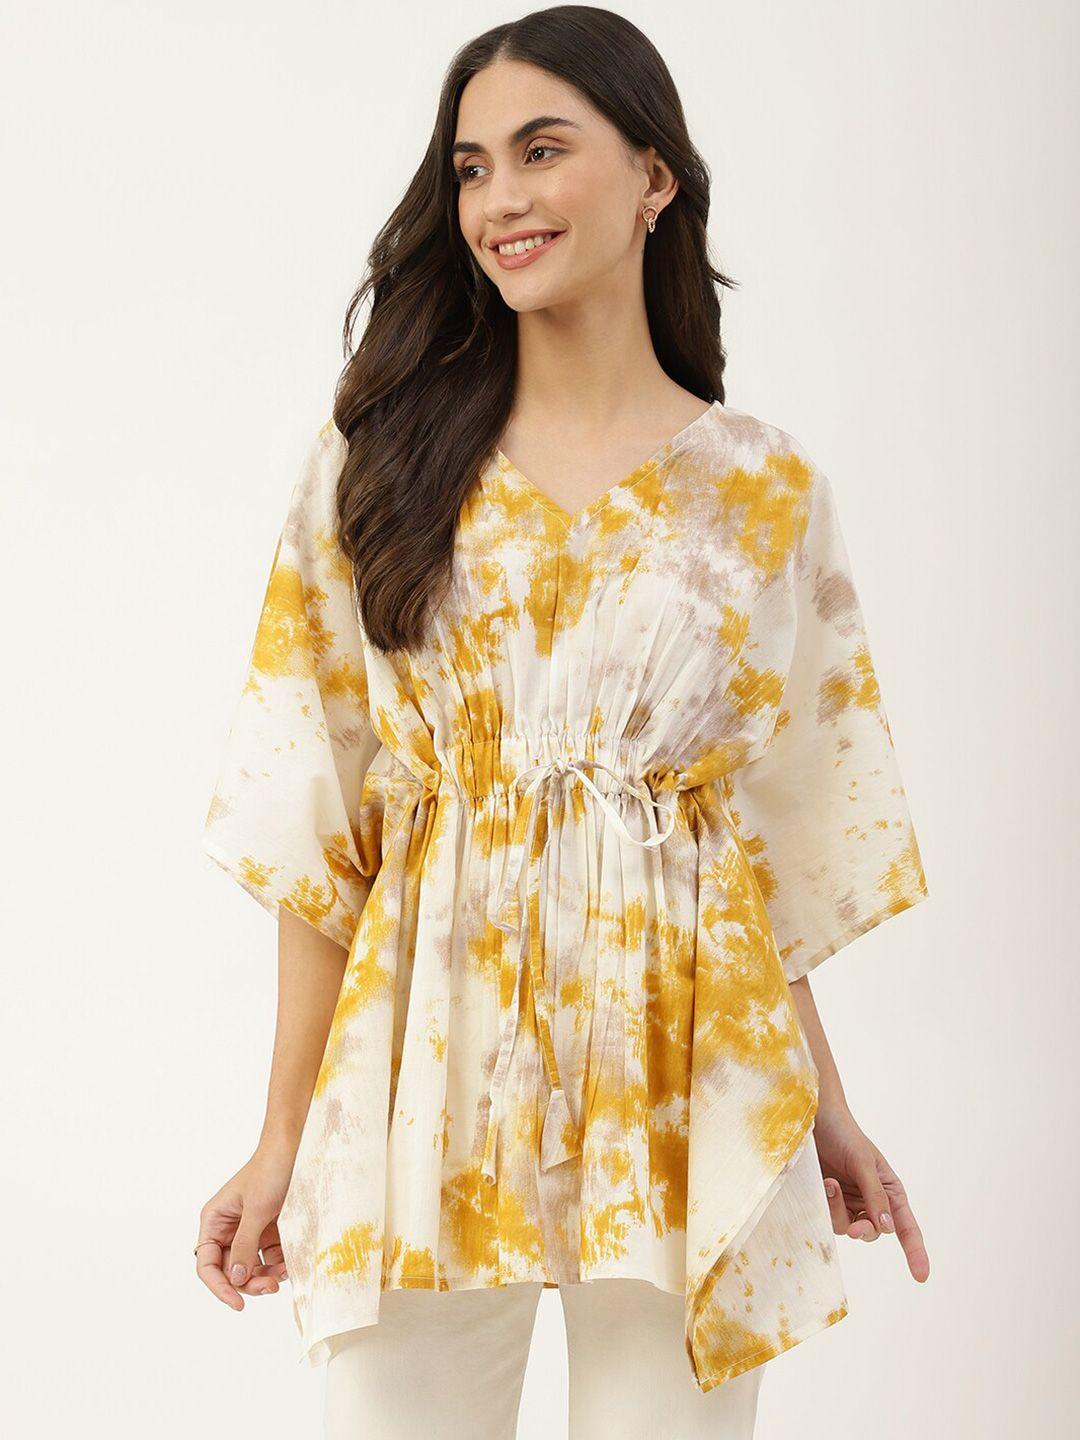 deckedup-yellow-floral-print-extended-sleeves-cinched-waist-longline-top